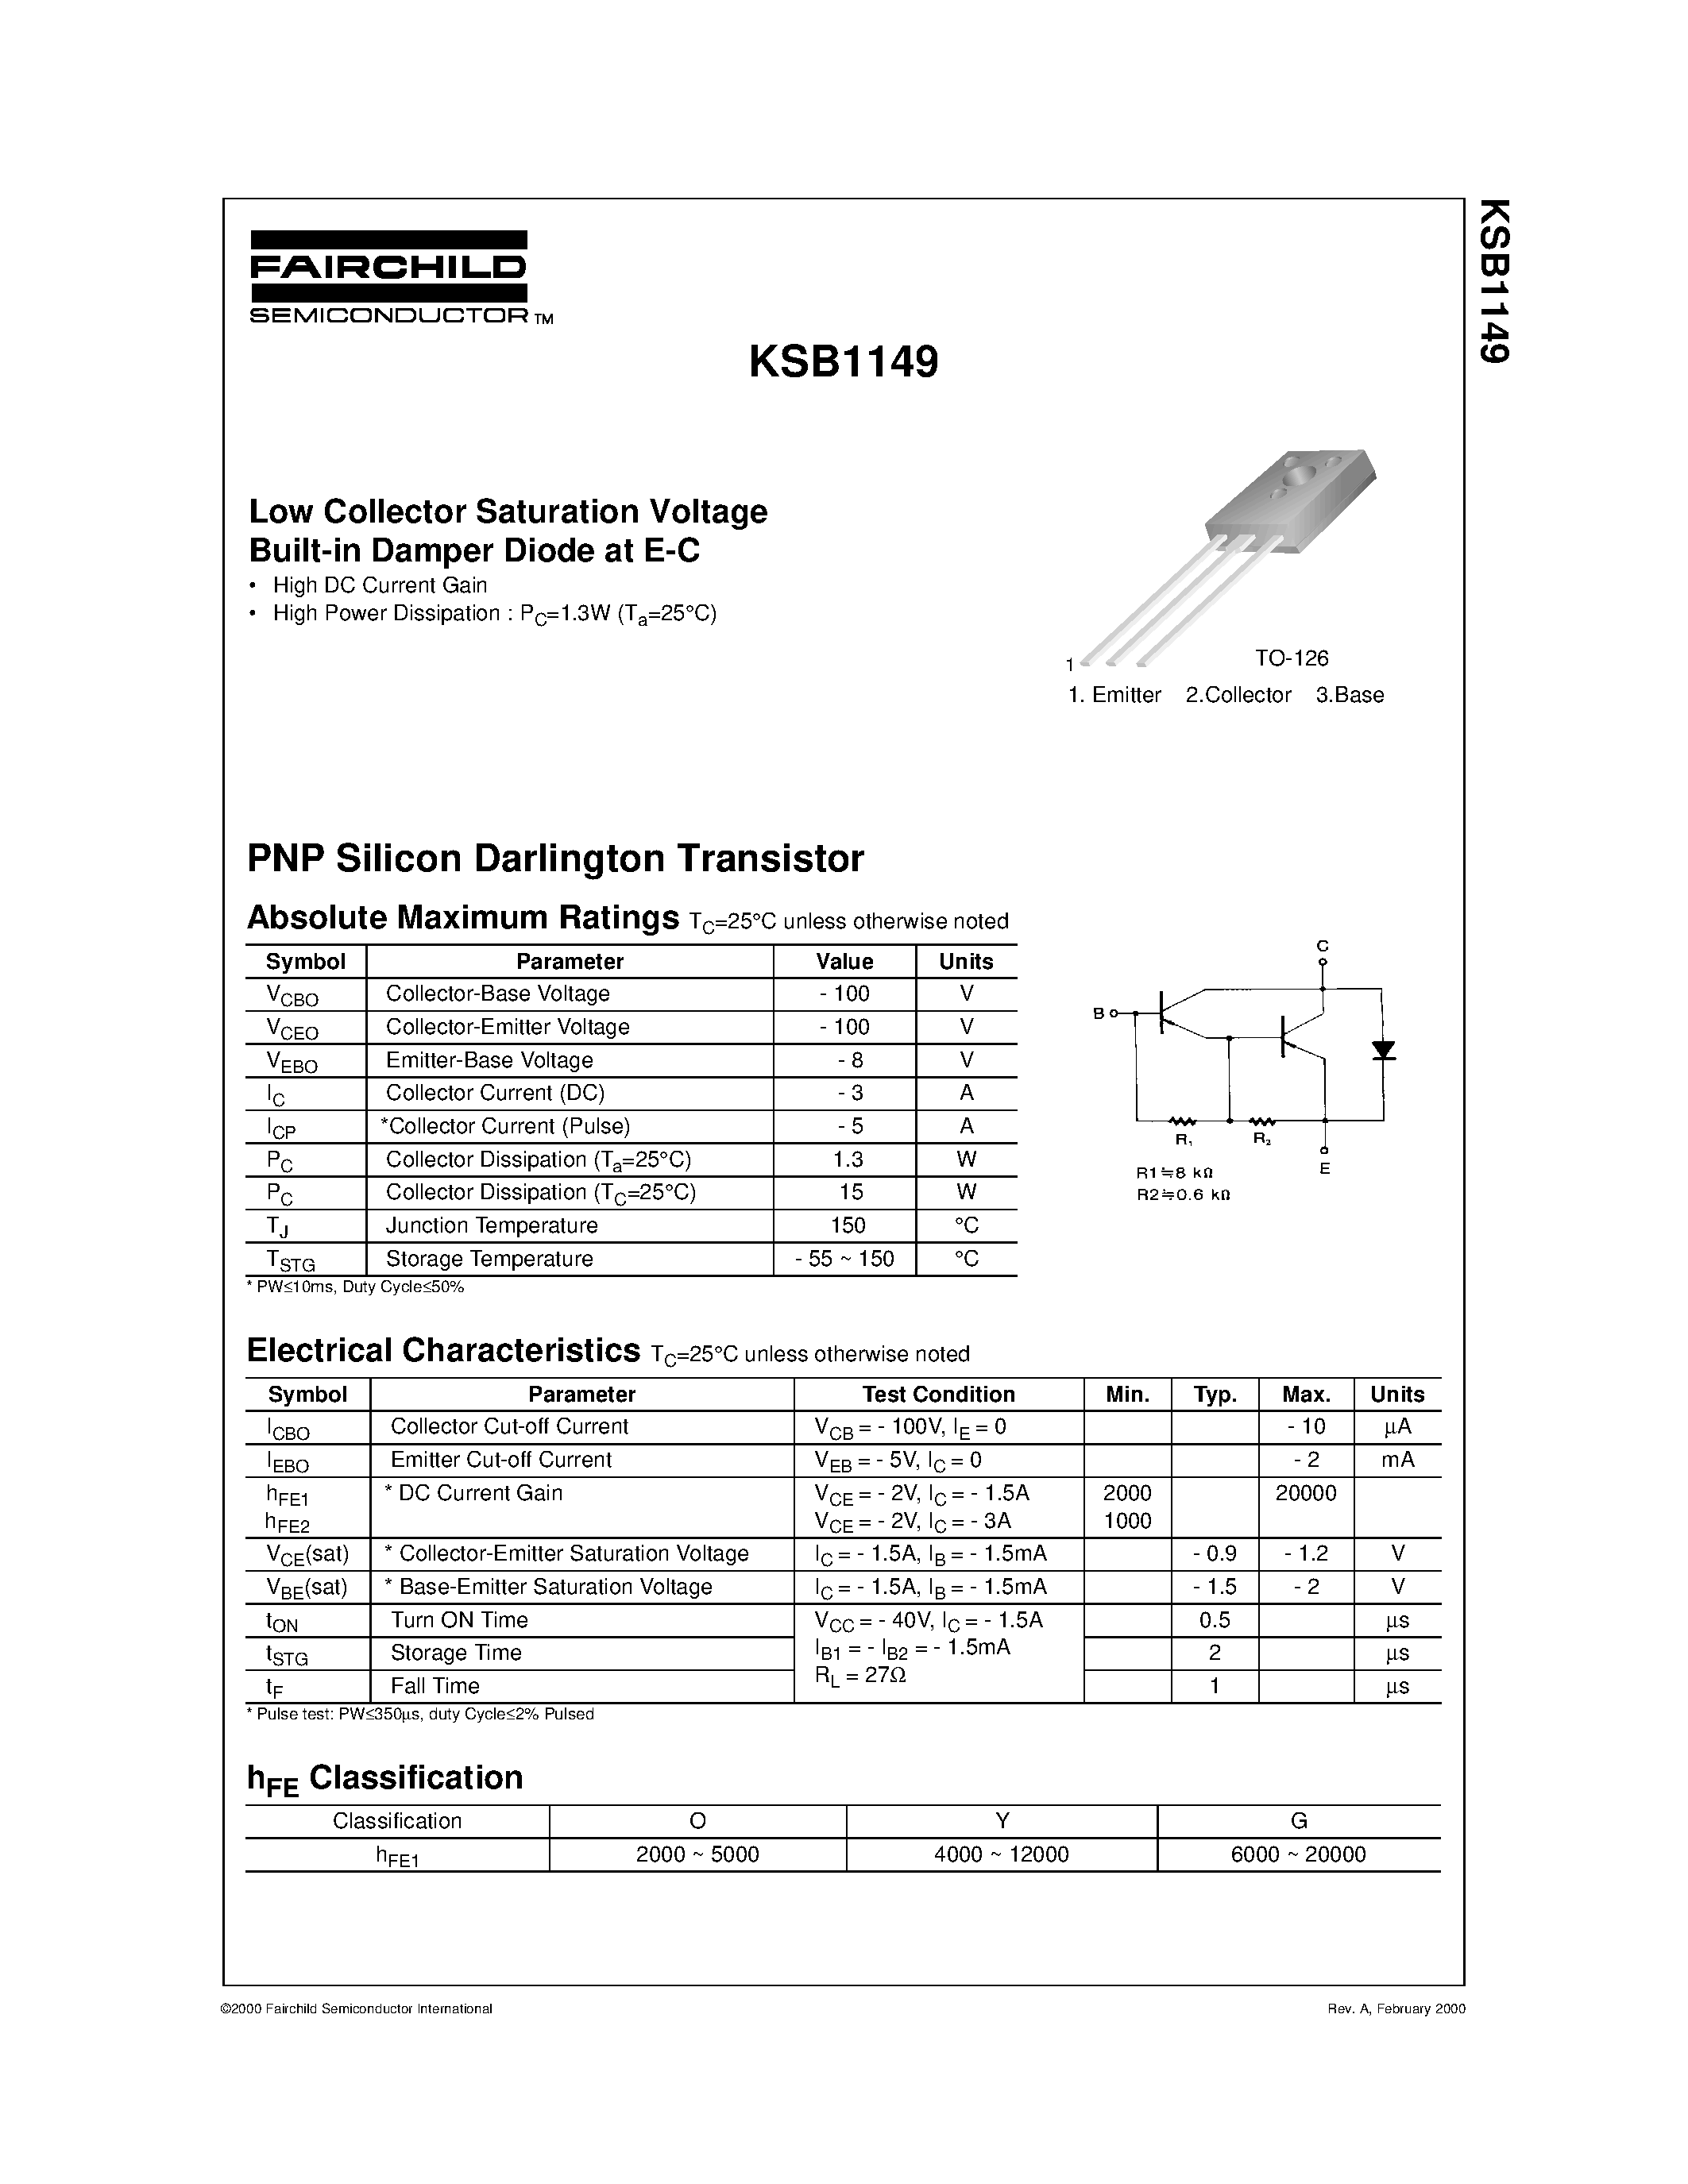 Datasheet KSB1149 - Low Collector Saturation Voltage Built-in Damper Diode at E-C page 1